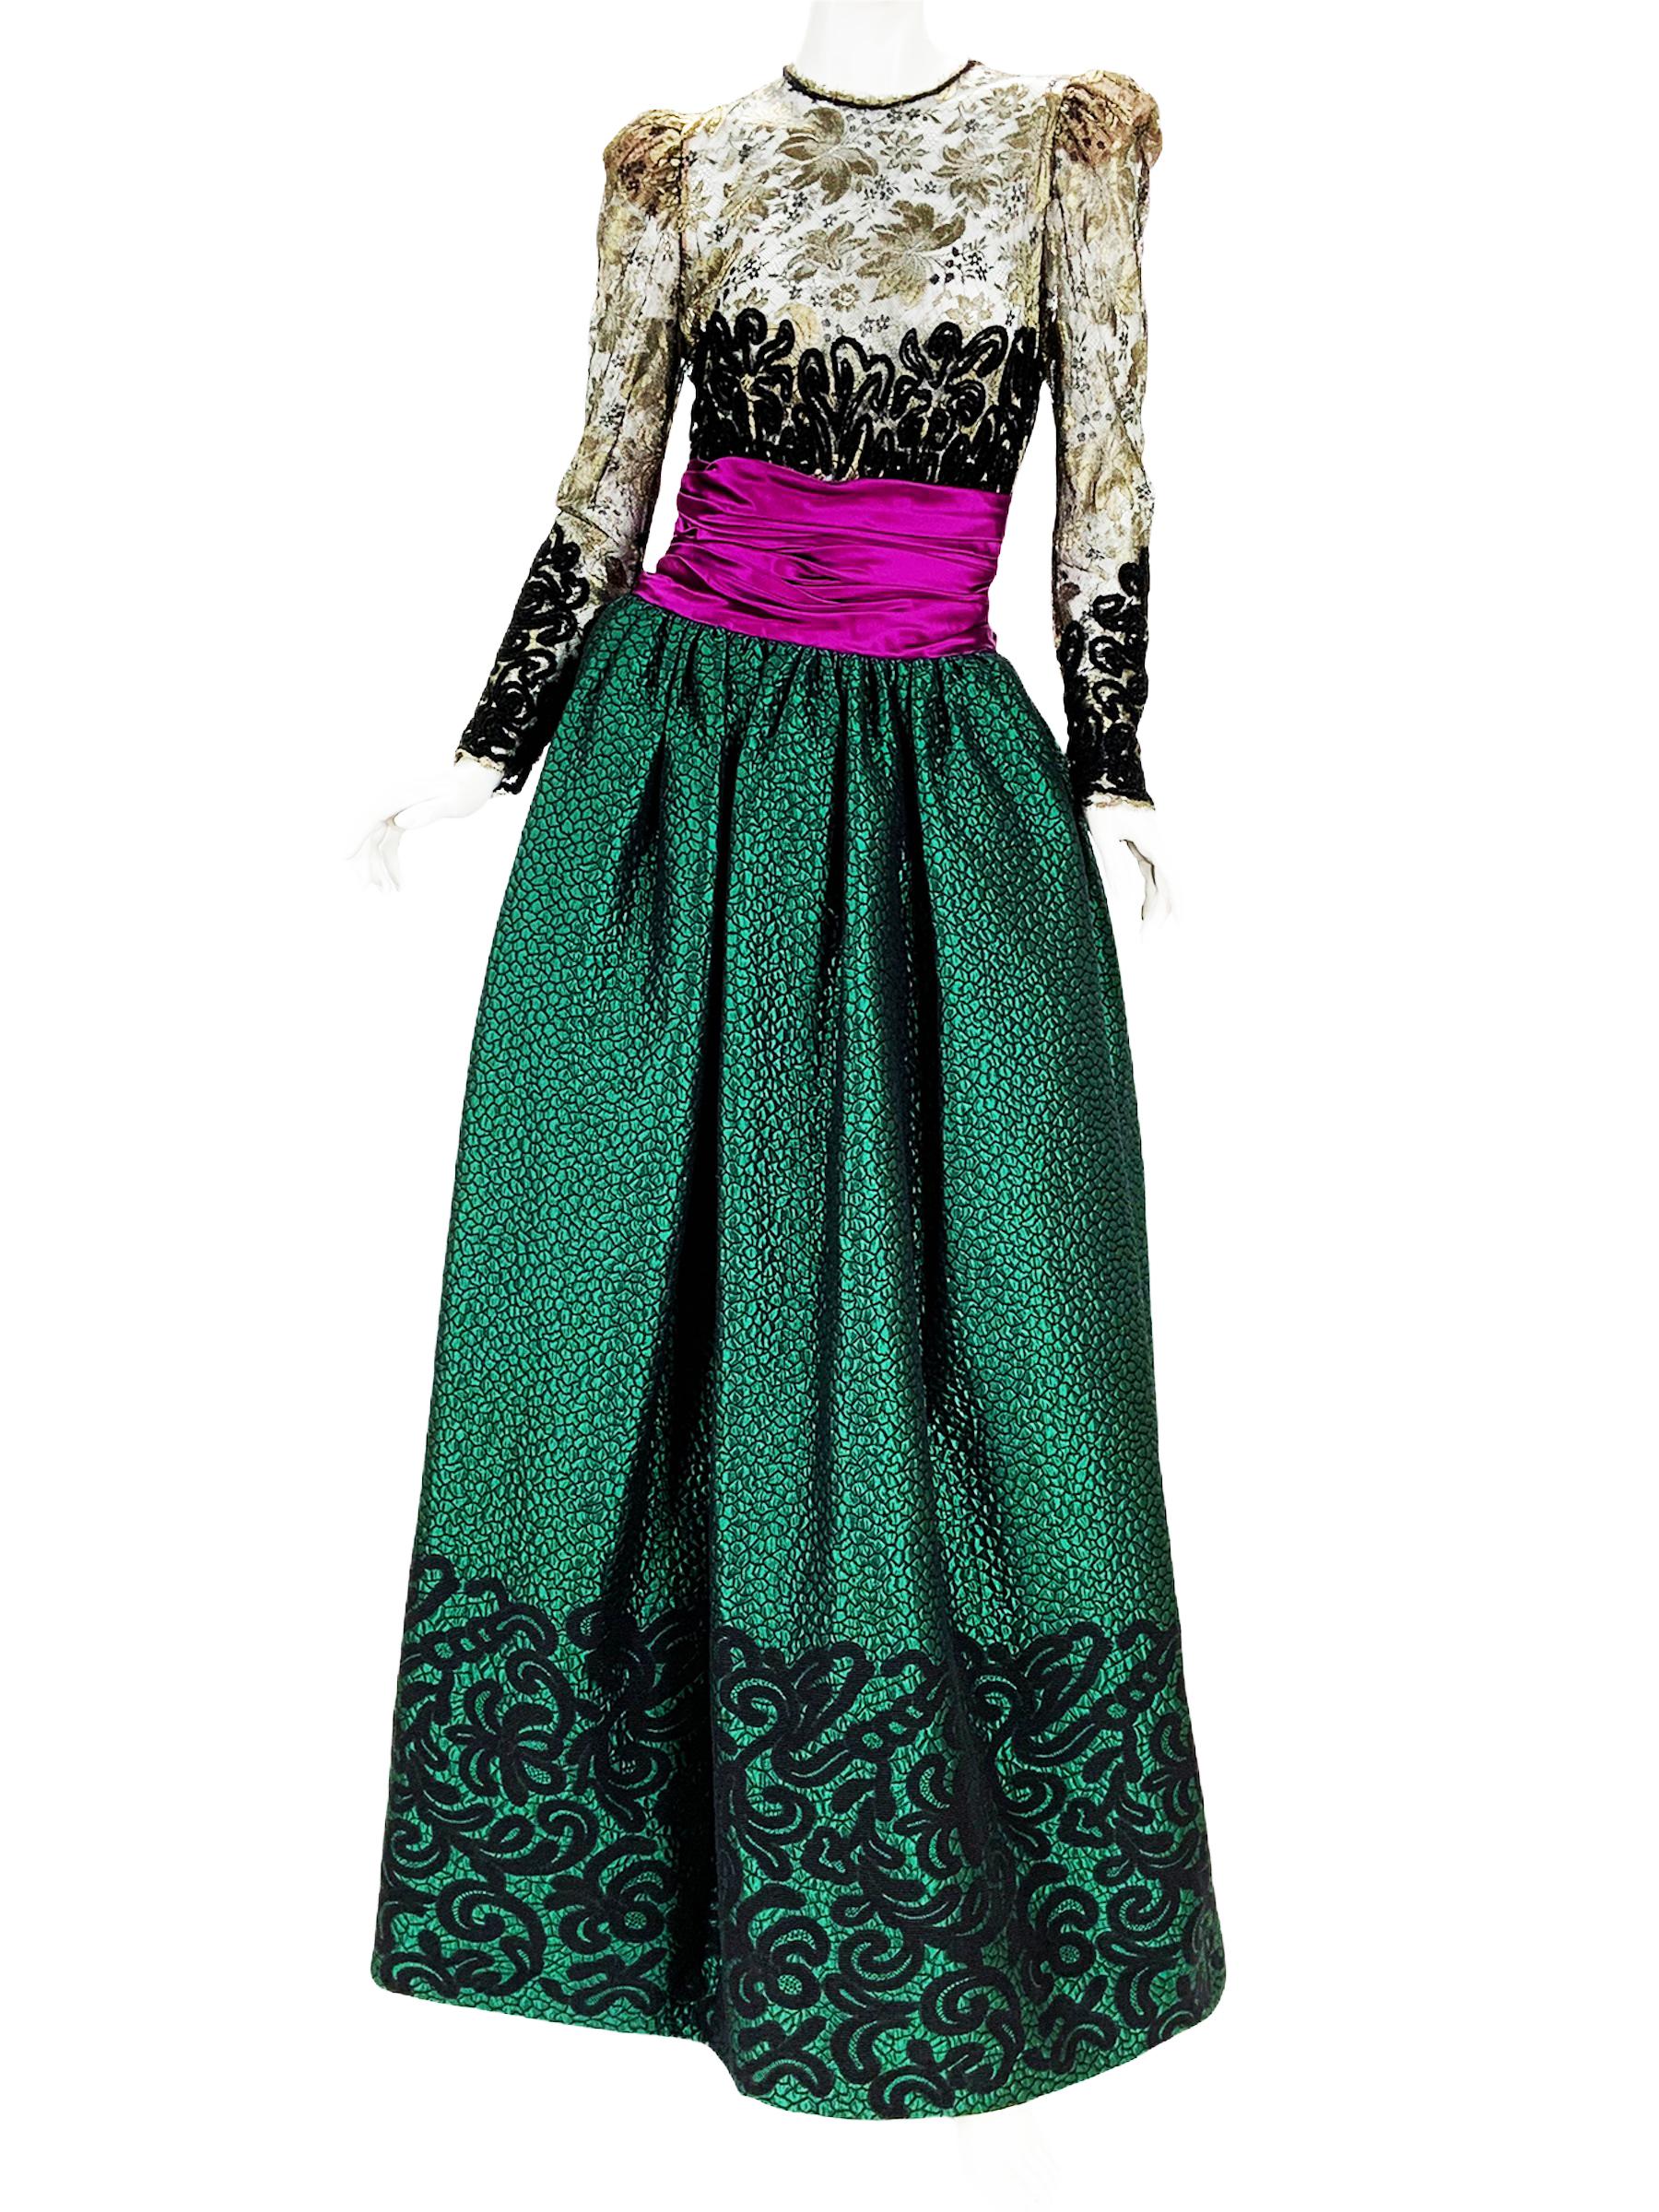 Vintage Oscar de la Renta for Fred Hayman Beverly Hills Matelassé Evening Dress Gown
Designer size - 6
C 1986 Collection
Same dress located in the Museum of Fine Arts, Houston
Amazing combination of the contrast colors and fabrics!!! The top is made